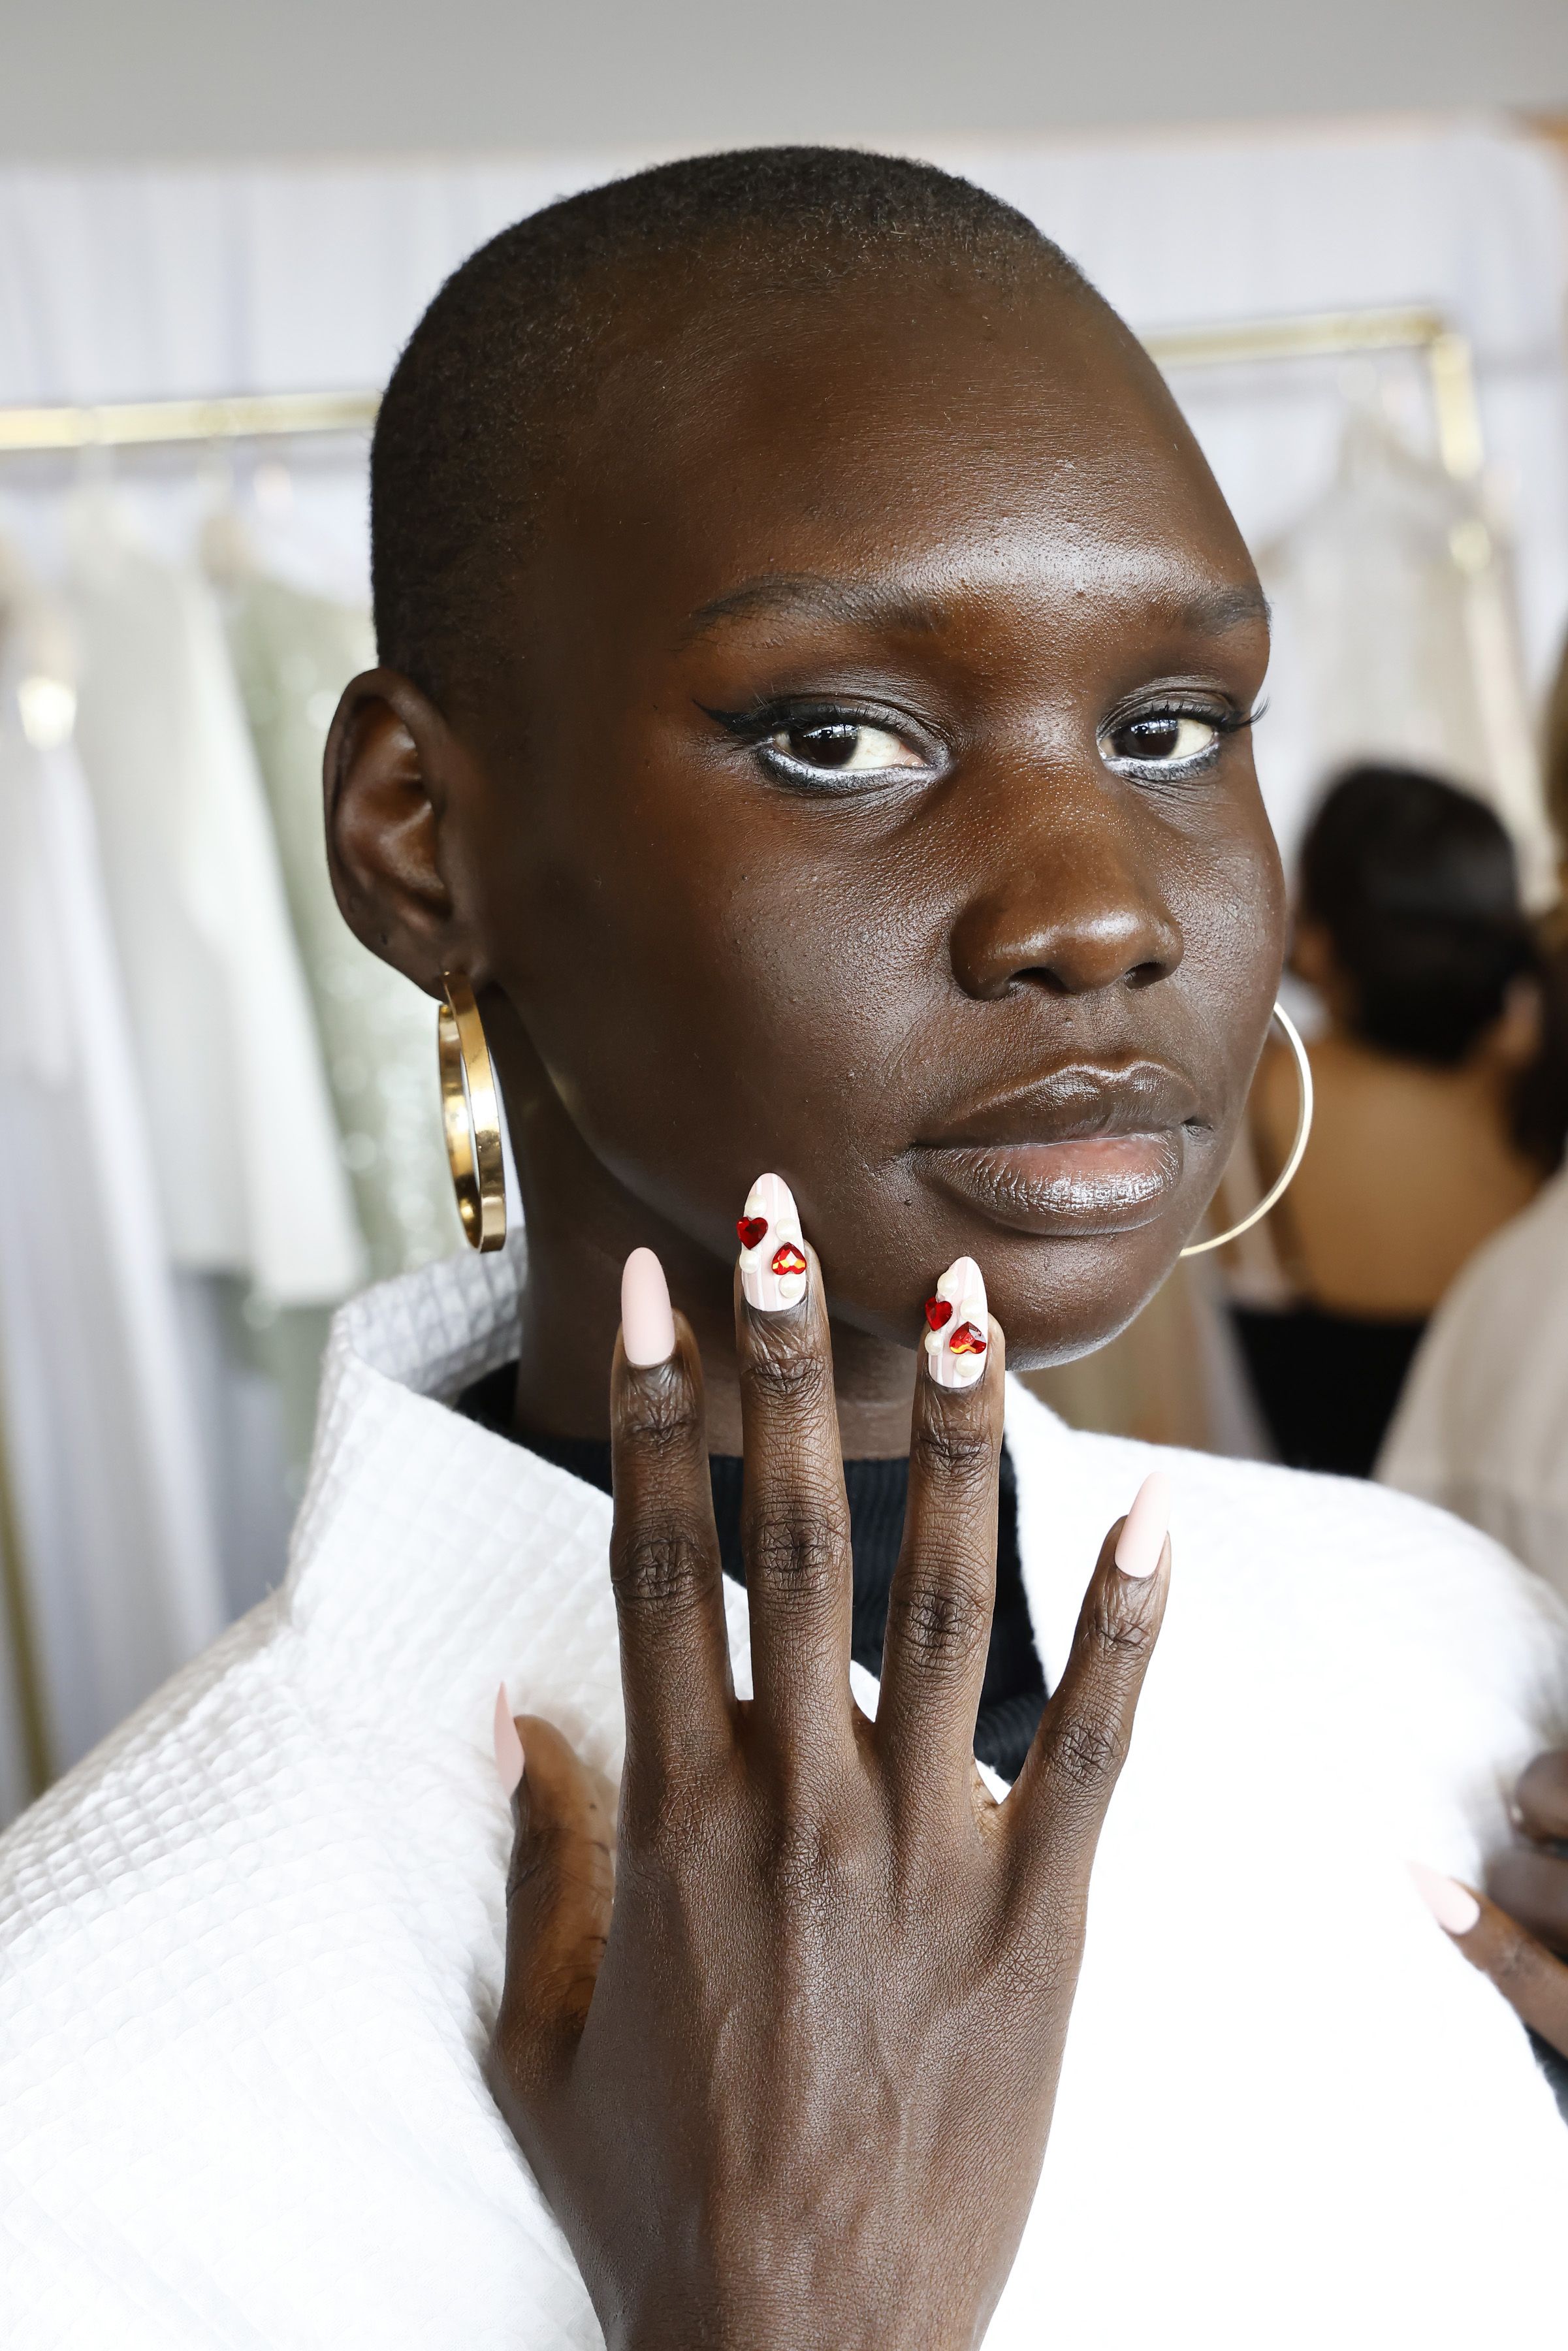 The Best Nail Trends for Spring 2022 - Nail Art Trends for Spring